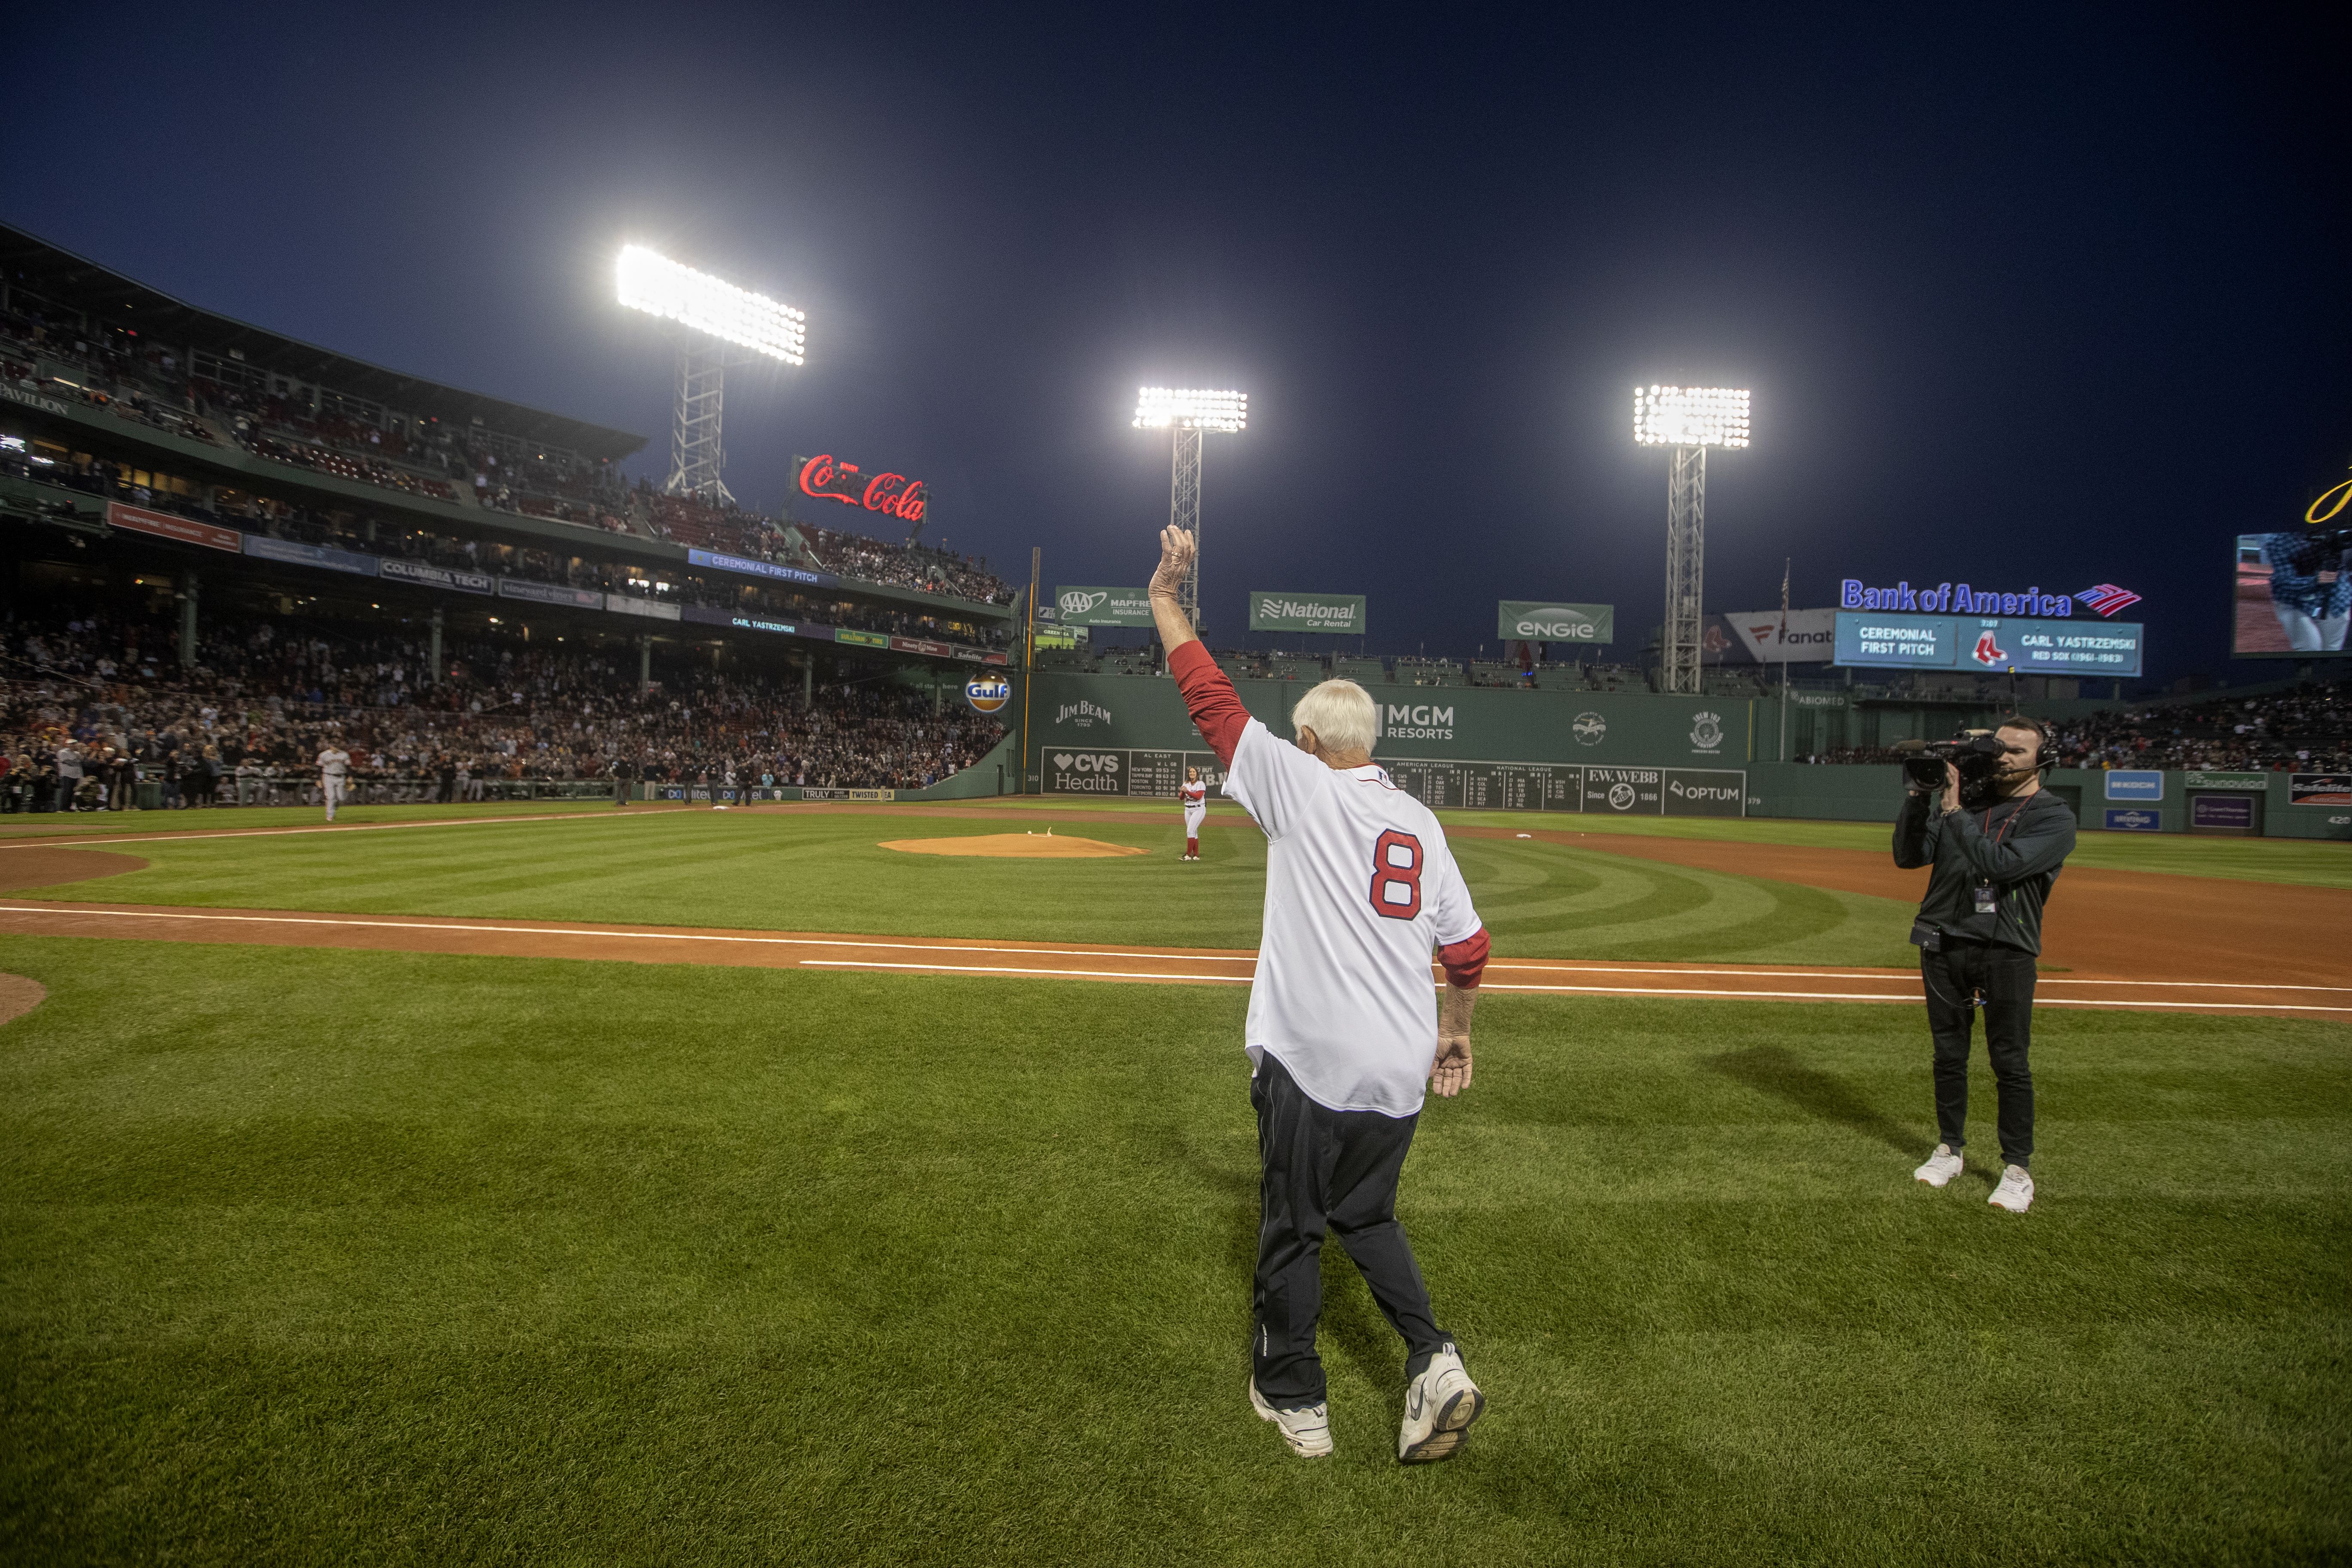 This Fenway series was a grand time for the Yastrzemskis - The Boston Globe